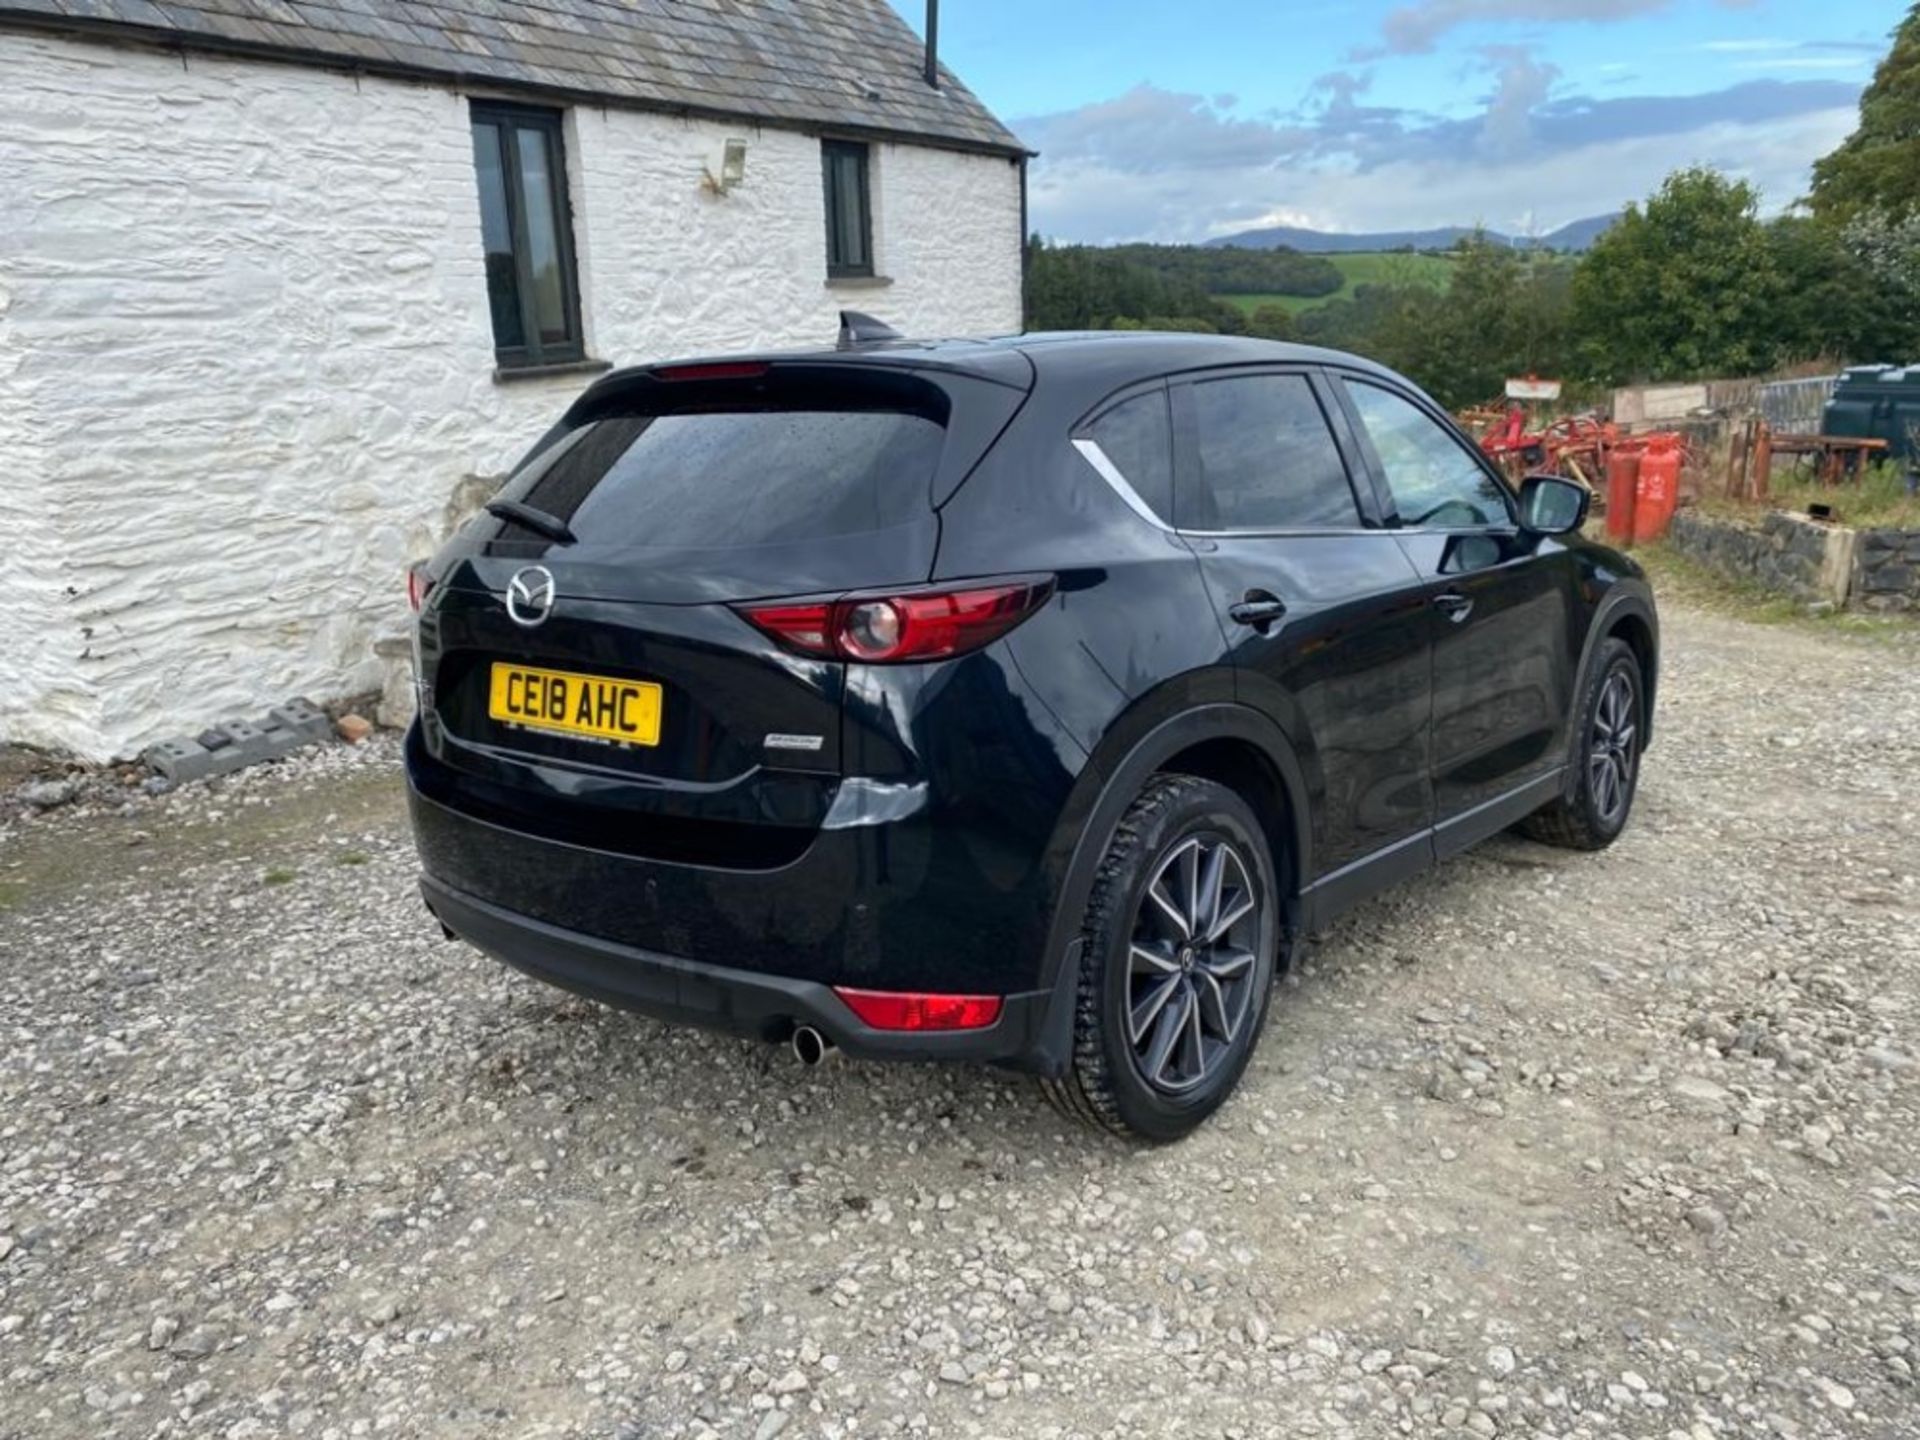 MAZDA CX- 5 2.2d CAR, 43,000 MILES (APPROX) - Image 2 of 6